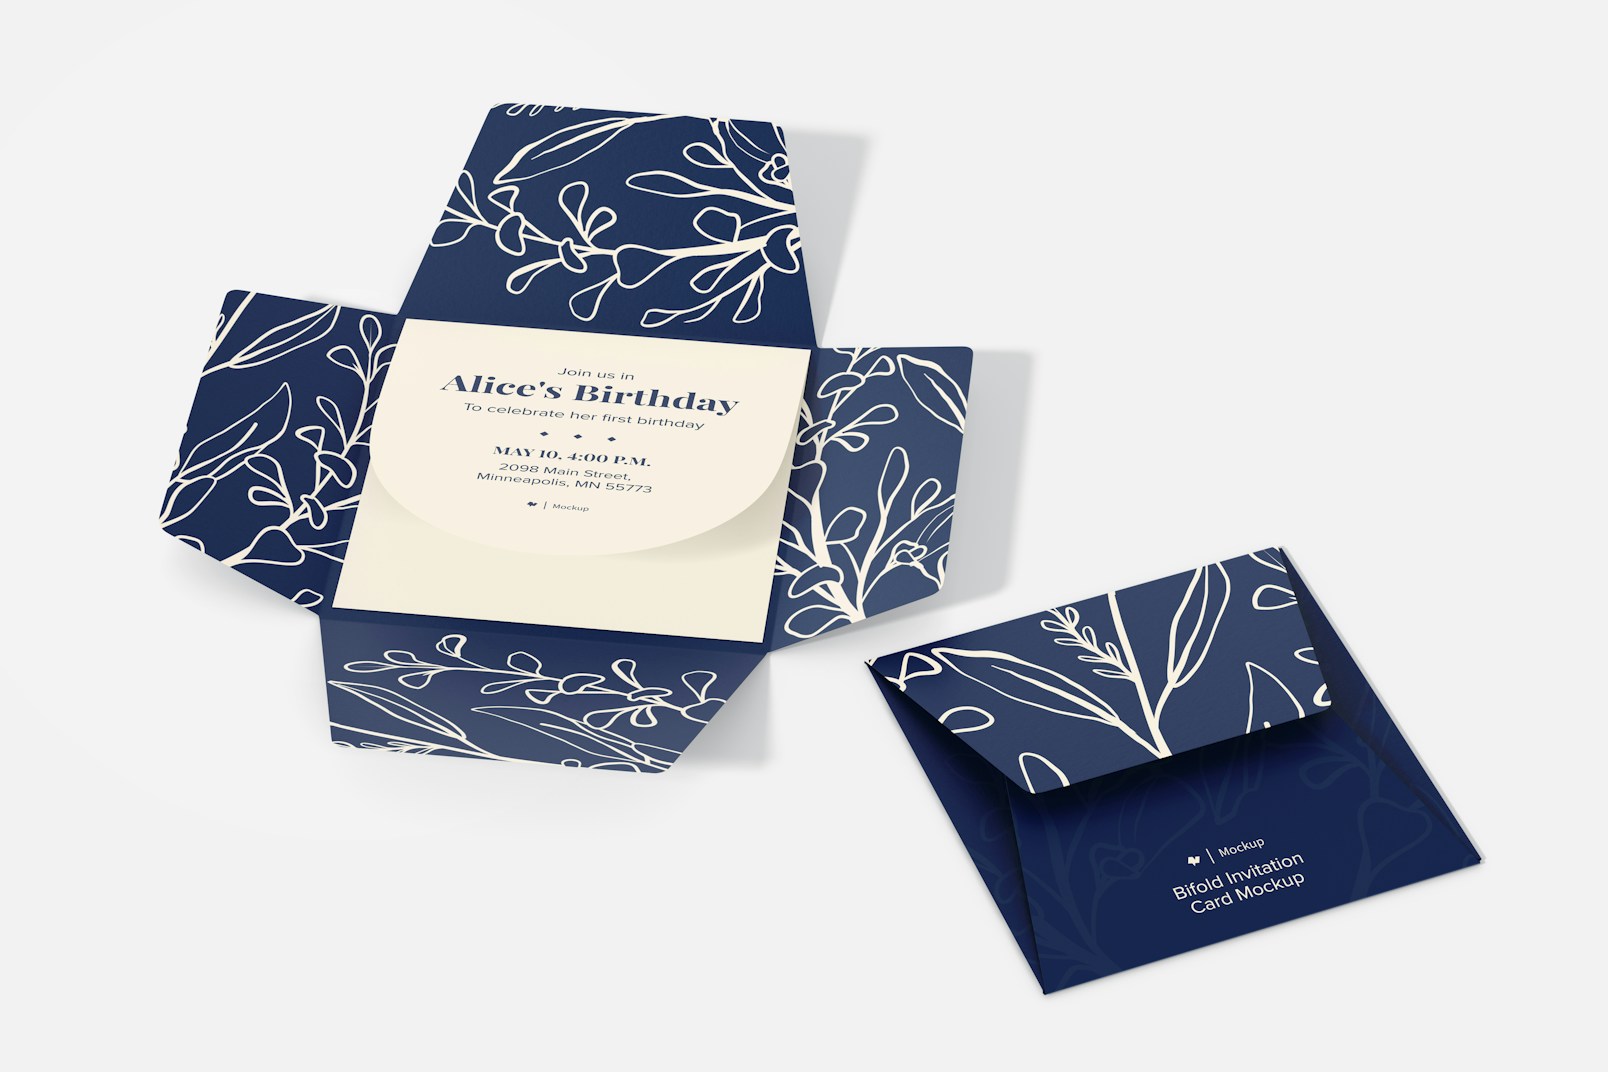 Bifold Invitation Cards Mockup, Opened and Closed